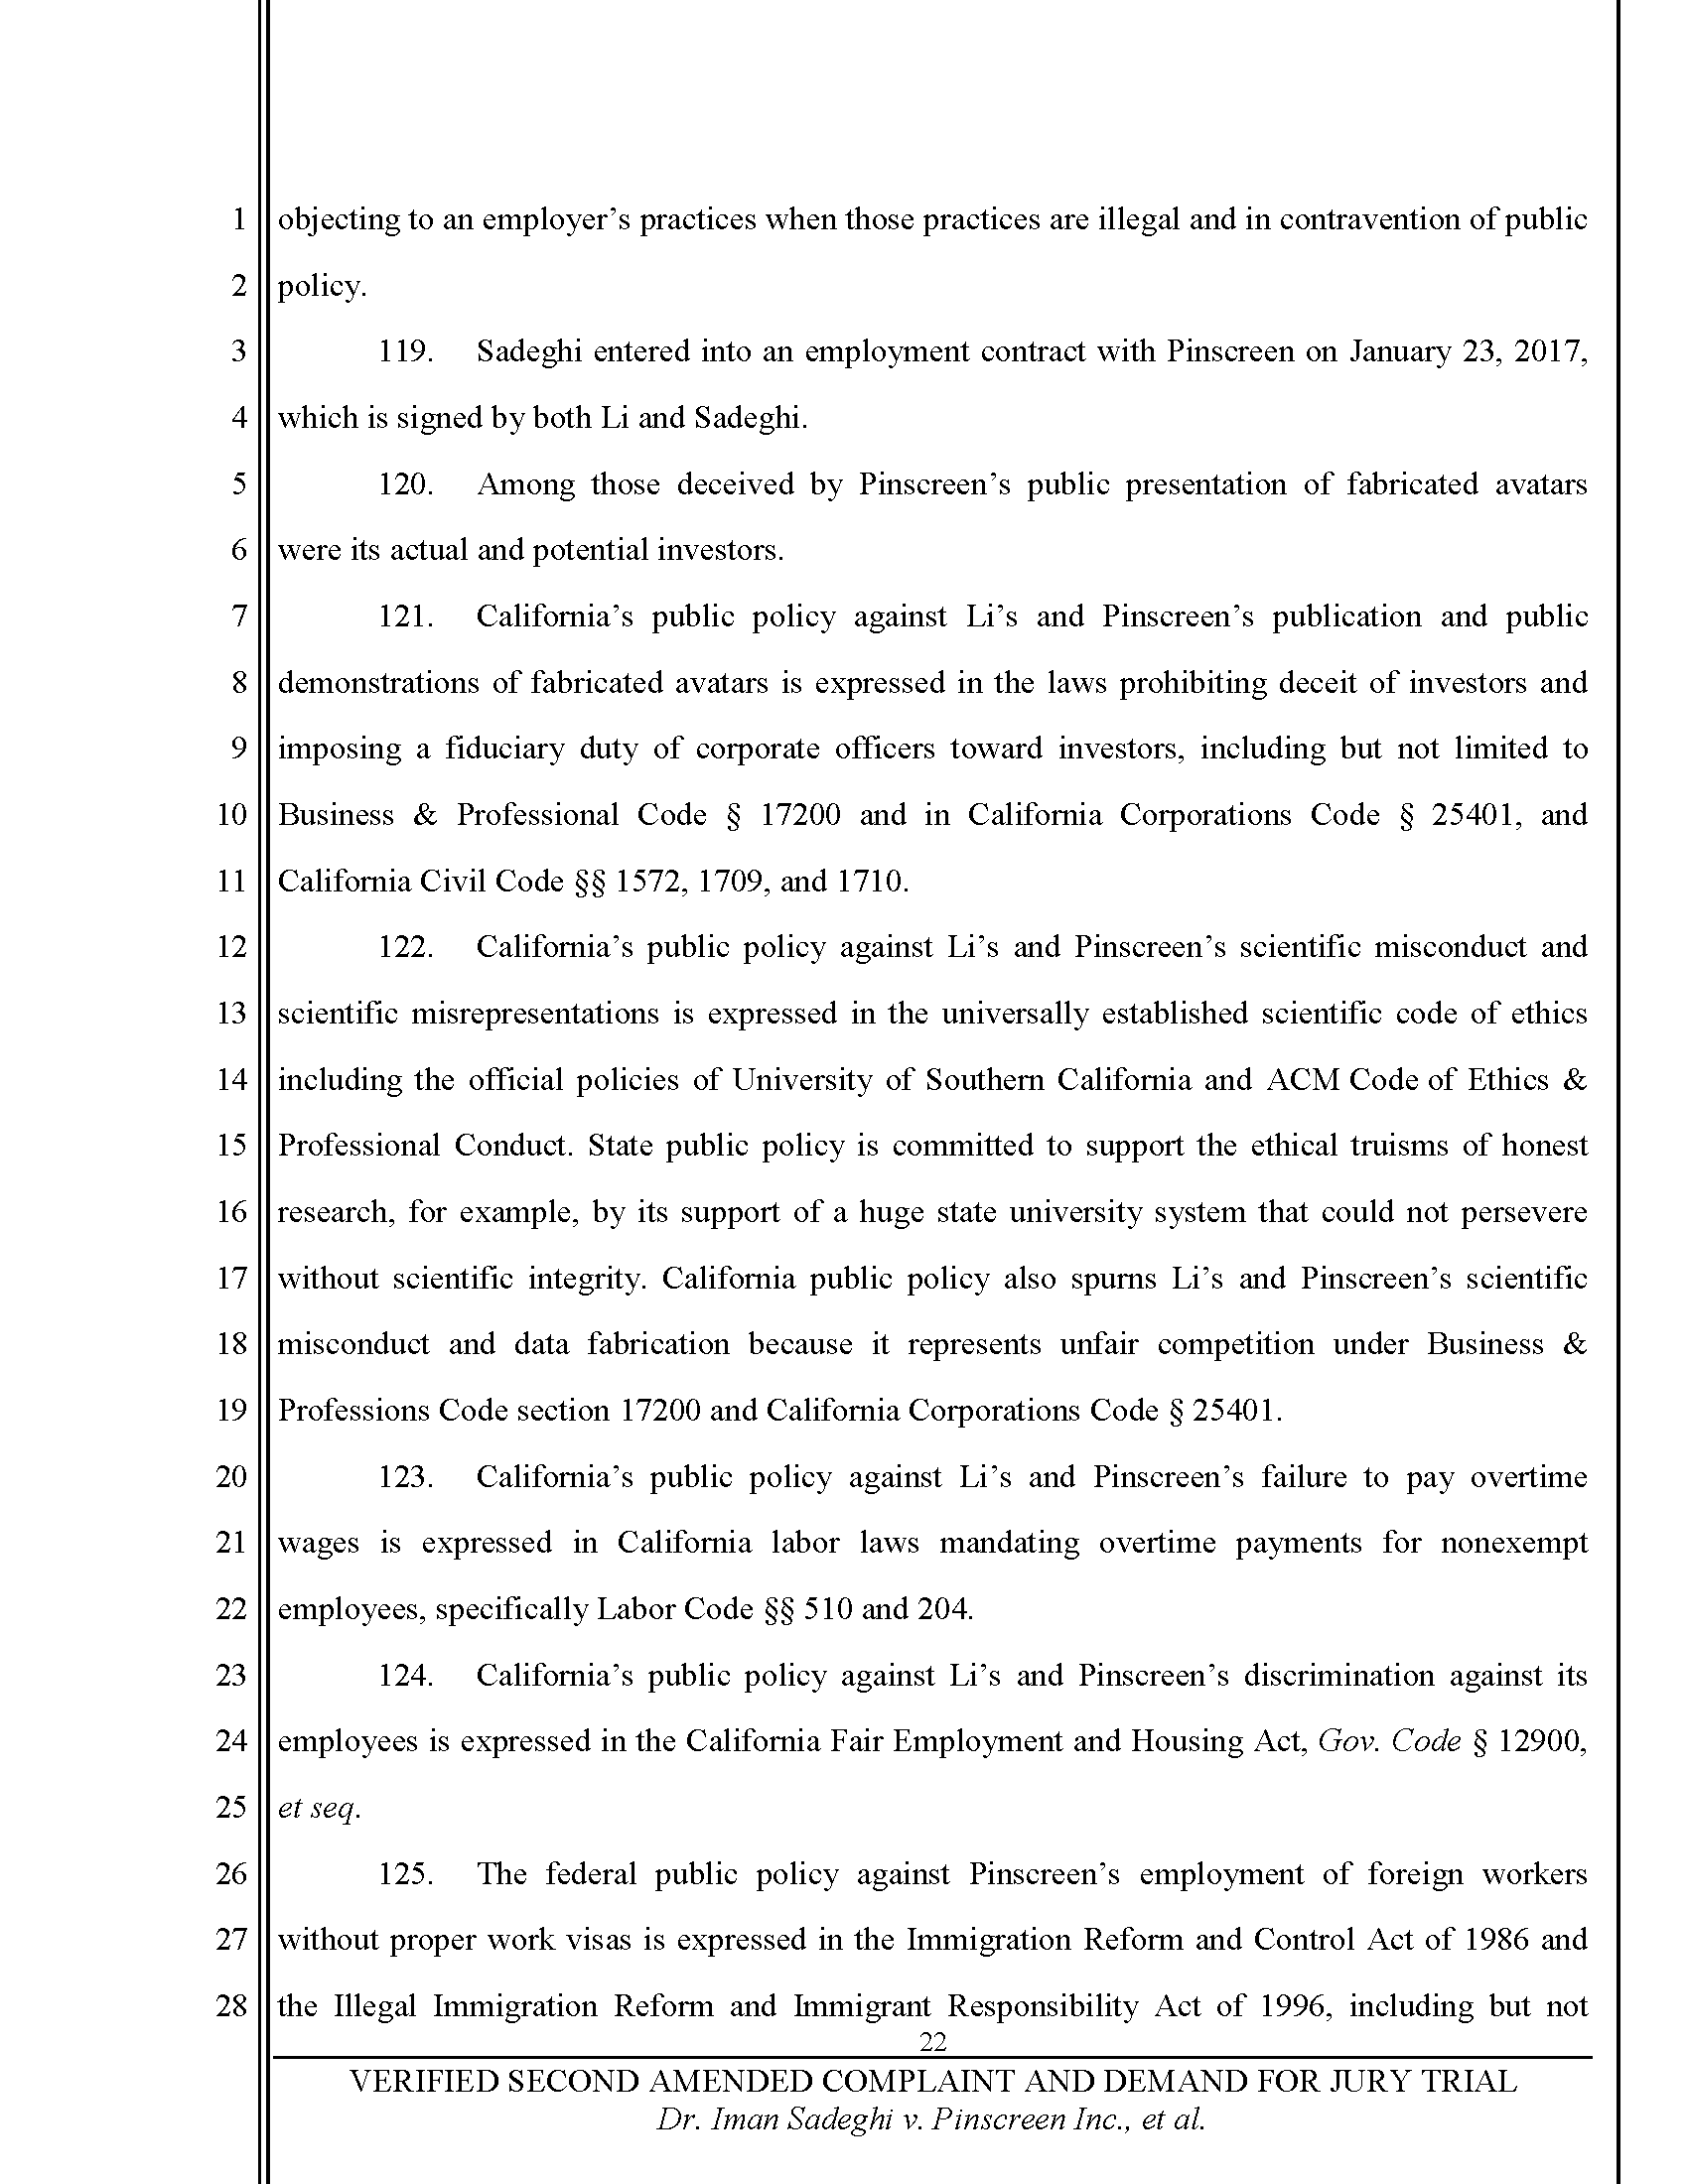 Second Amended Complaint (SAC) Page 23